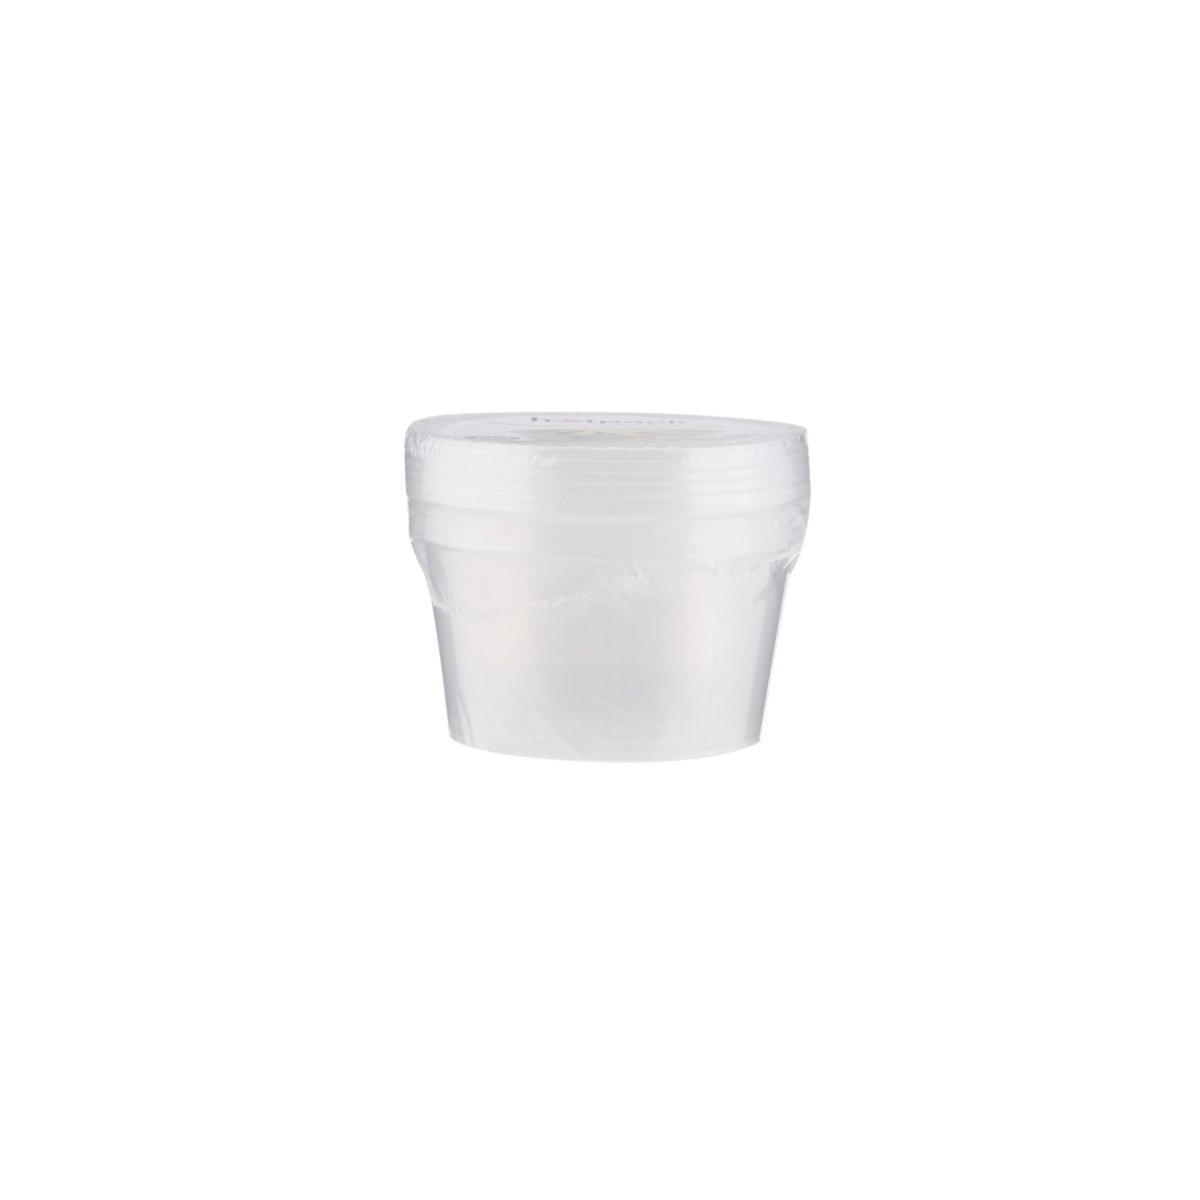 Round Microwavable Container 450 ML Base with Lid 5 Pieces - hotpackwebstore.com - Microwavable Containers